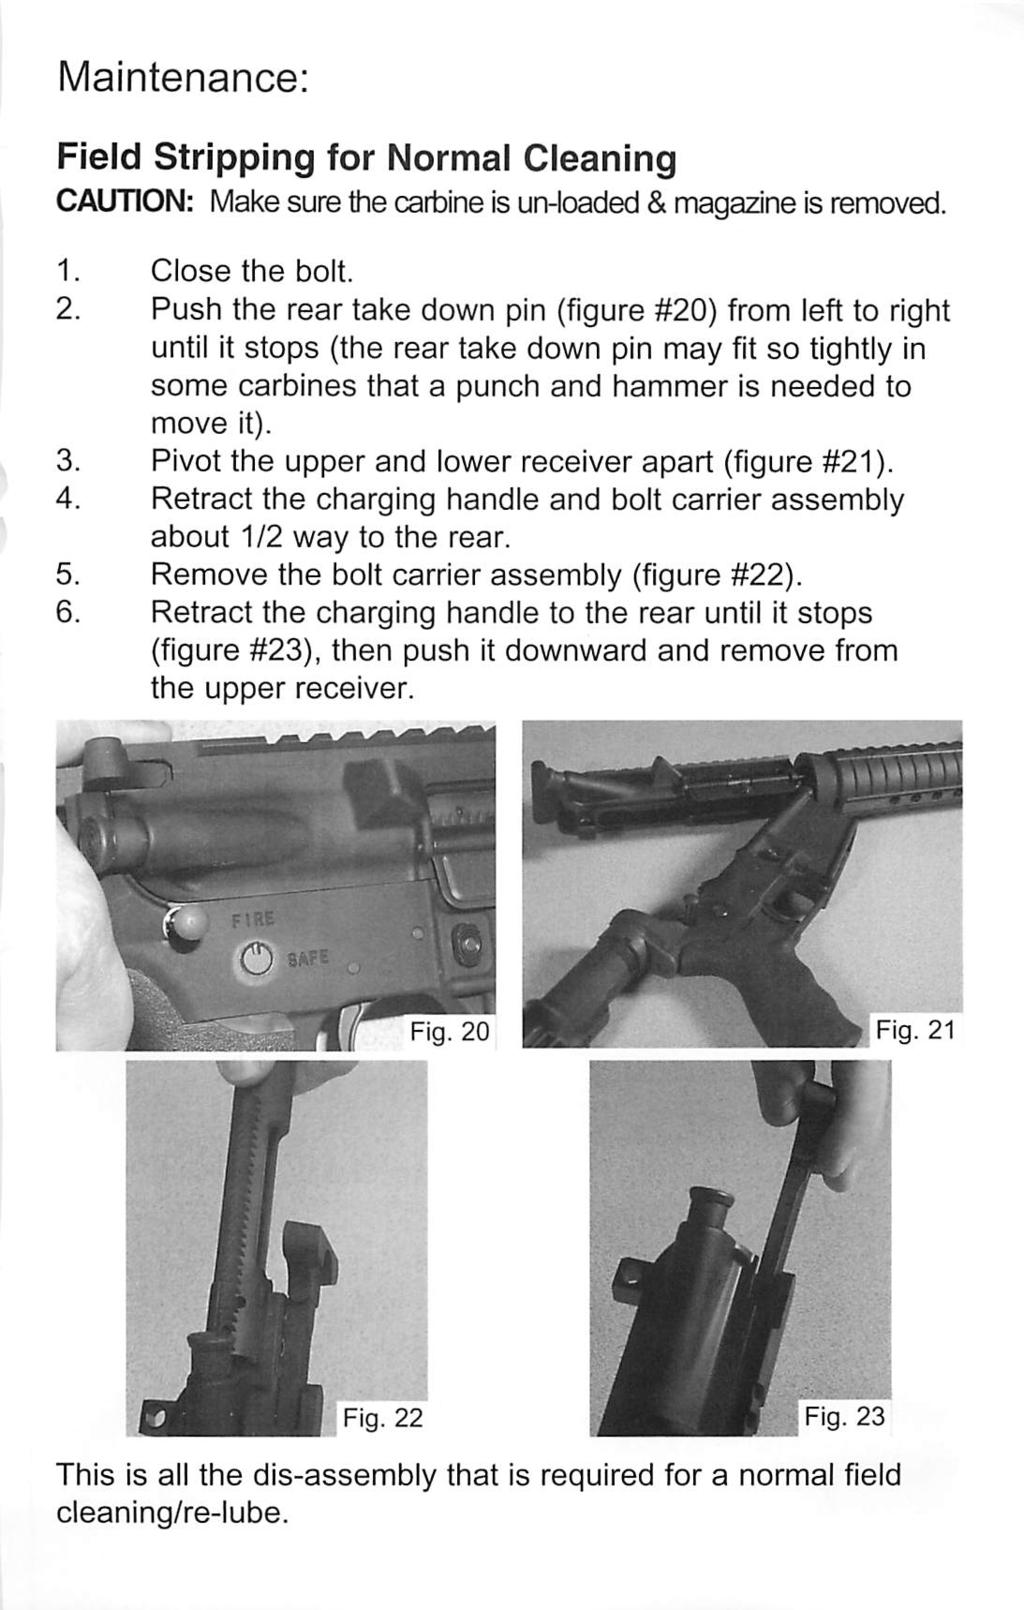 Maintenance: Field Stripping for Normal Cleaning CAUTION: Make sure the carbine is un-loaded &magazine is removed. Close the bolt.